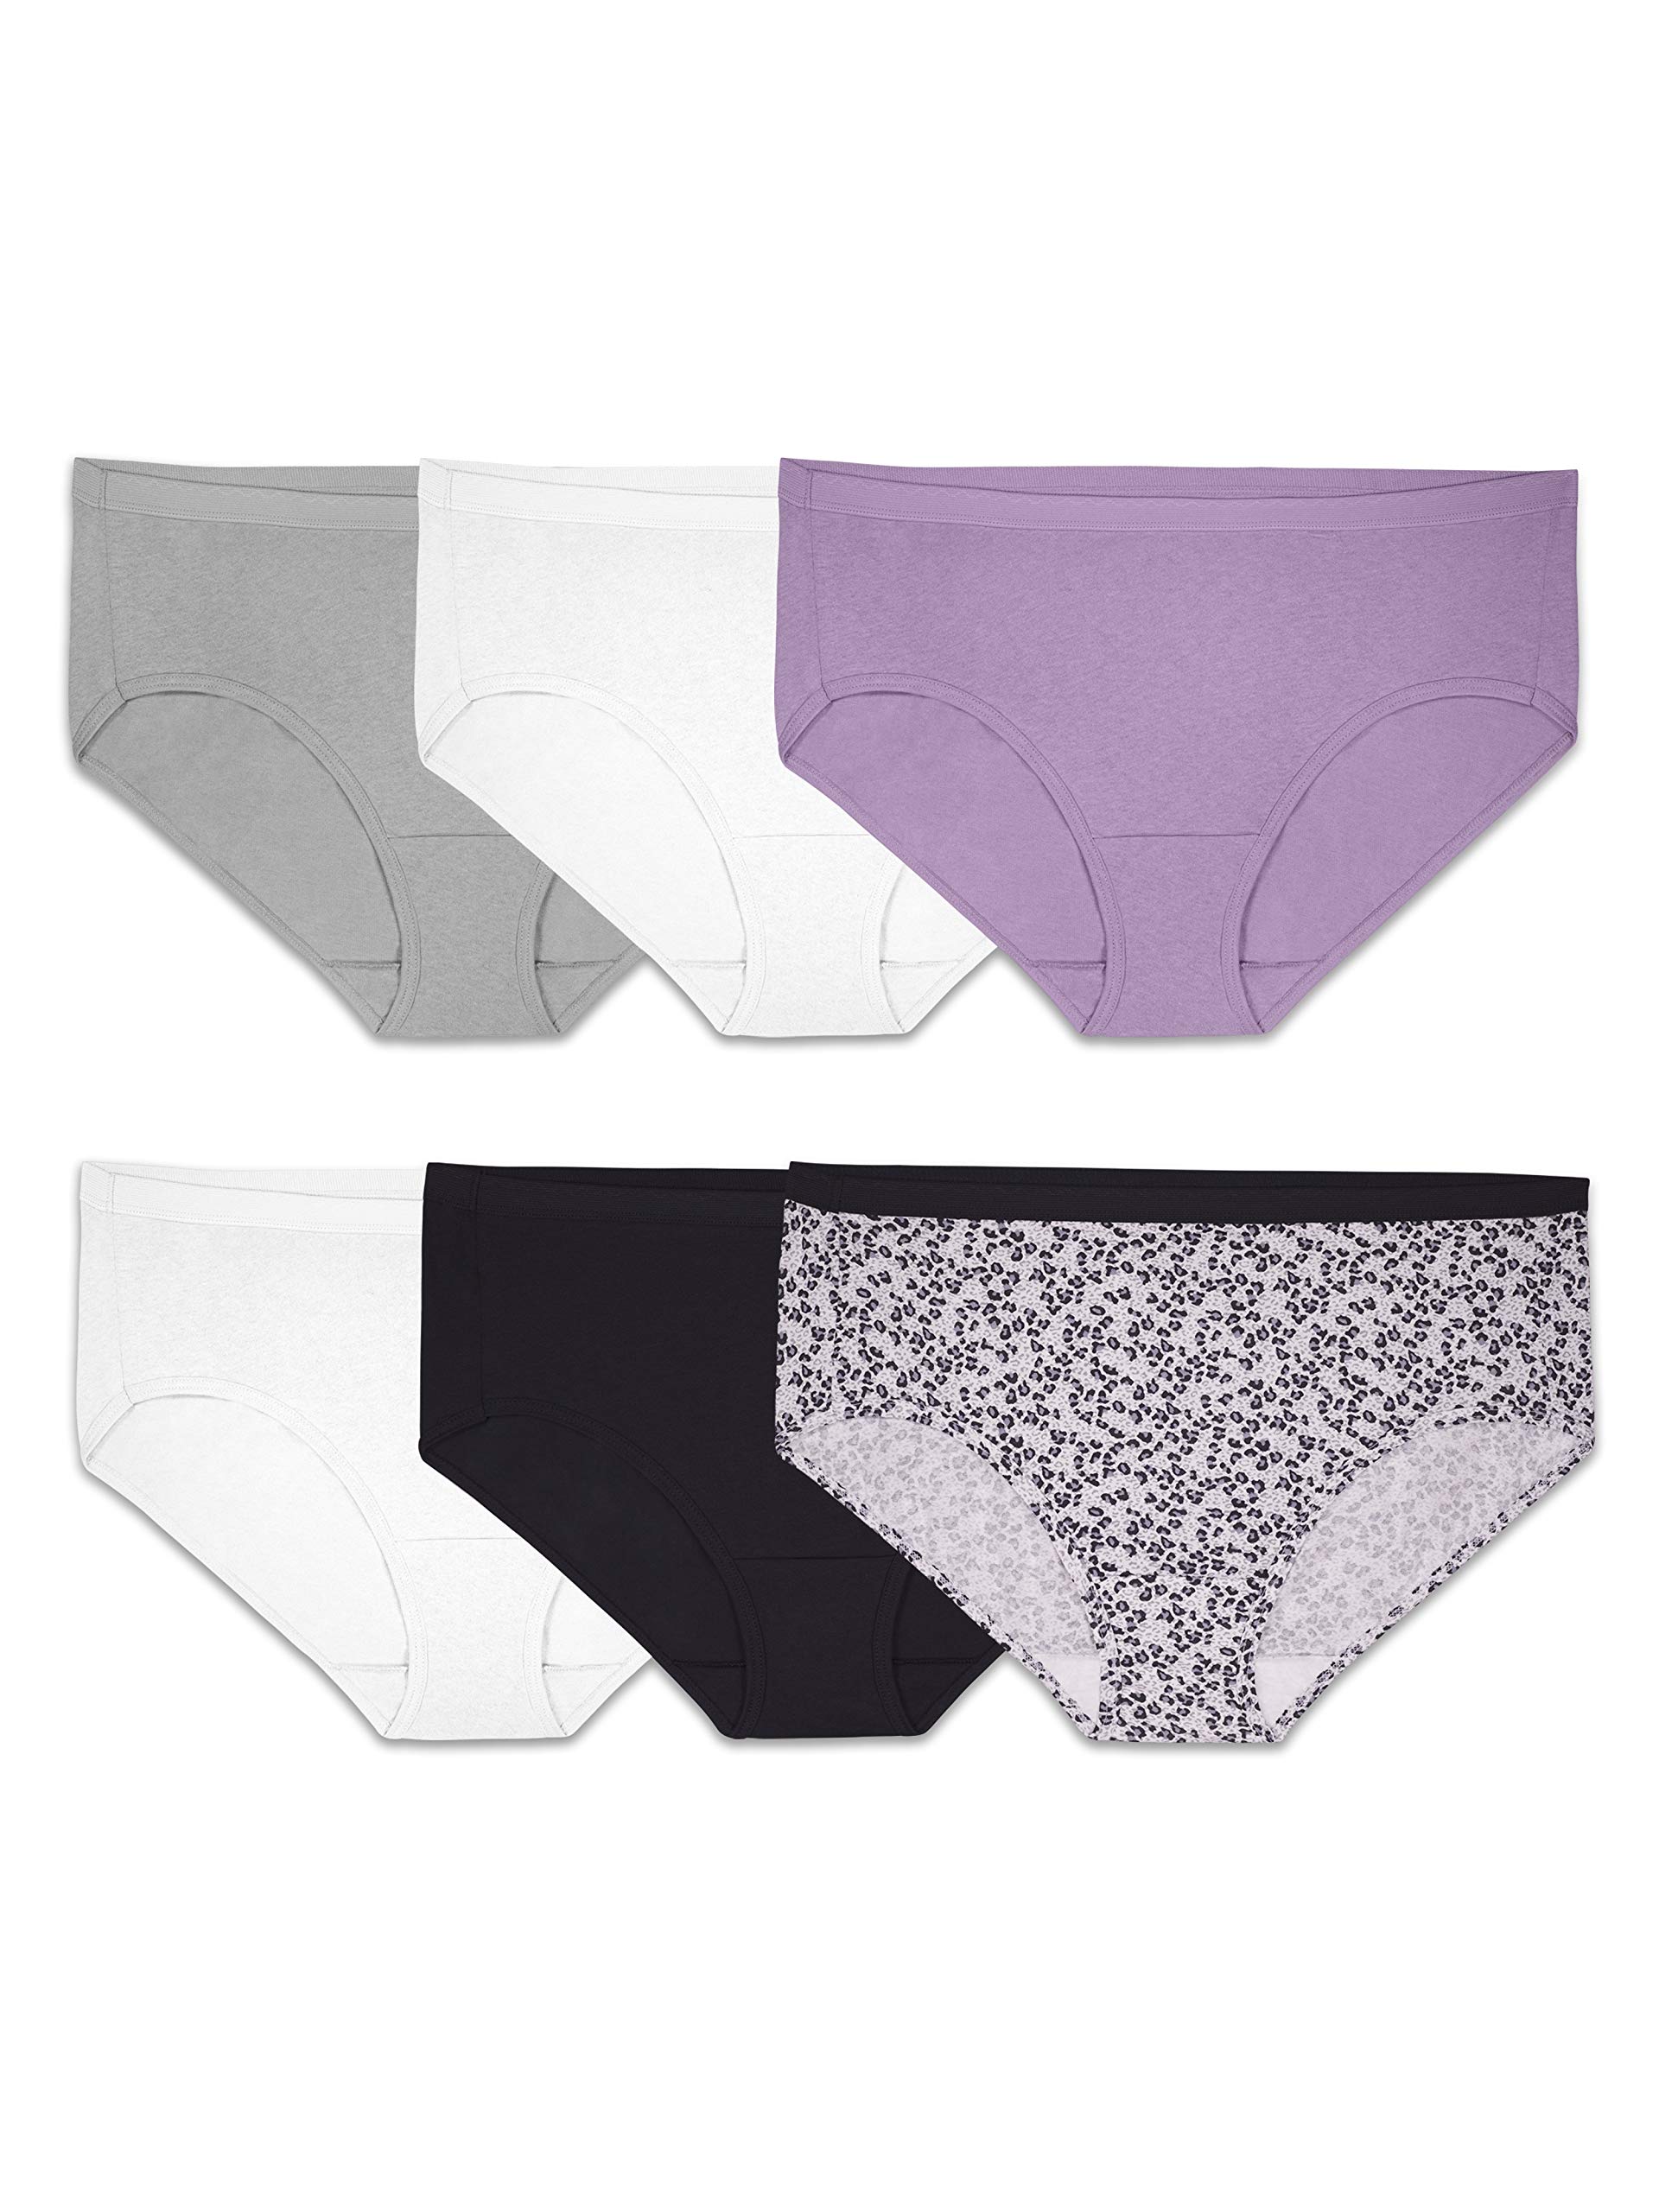 Fruit of the Loom Women's Fit for Me Plus Size Underwear